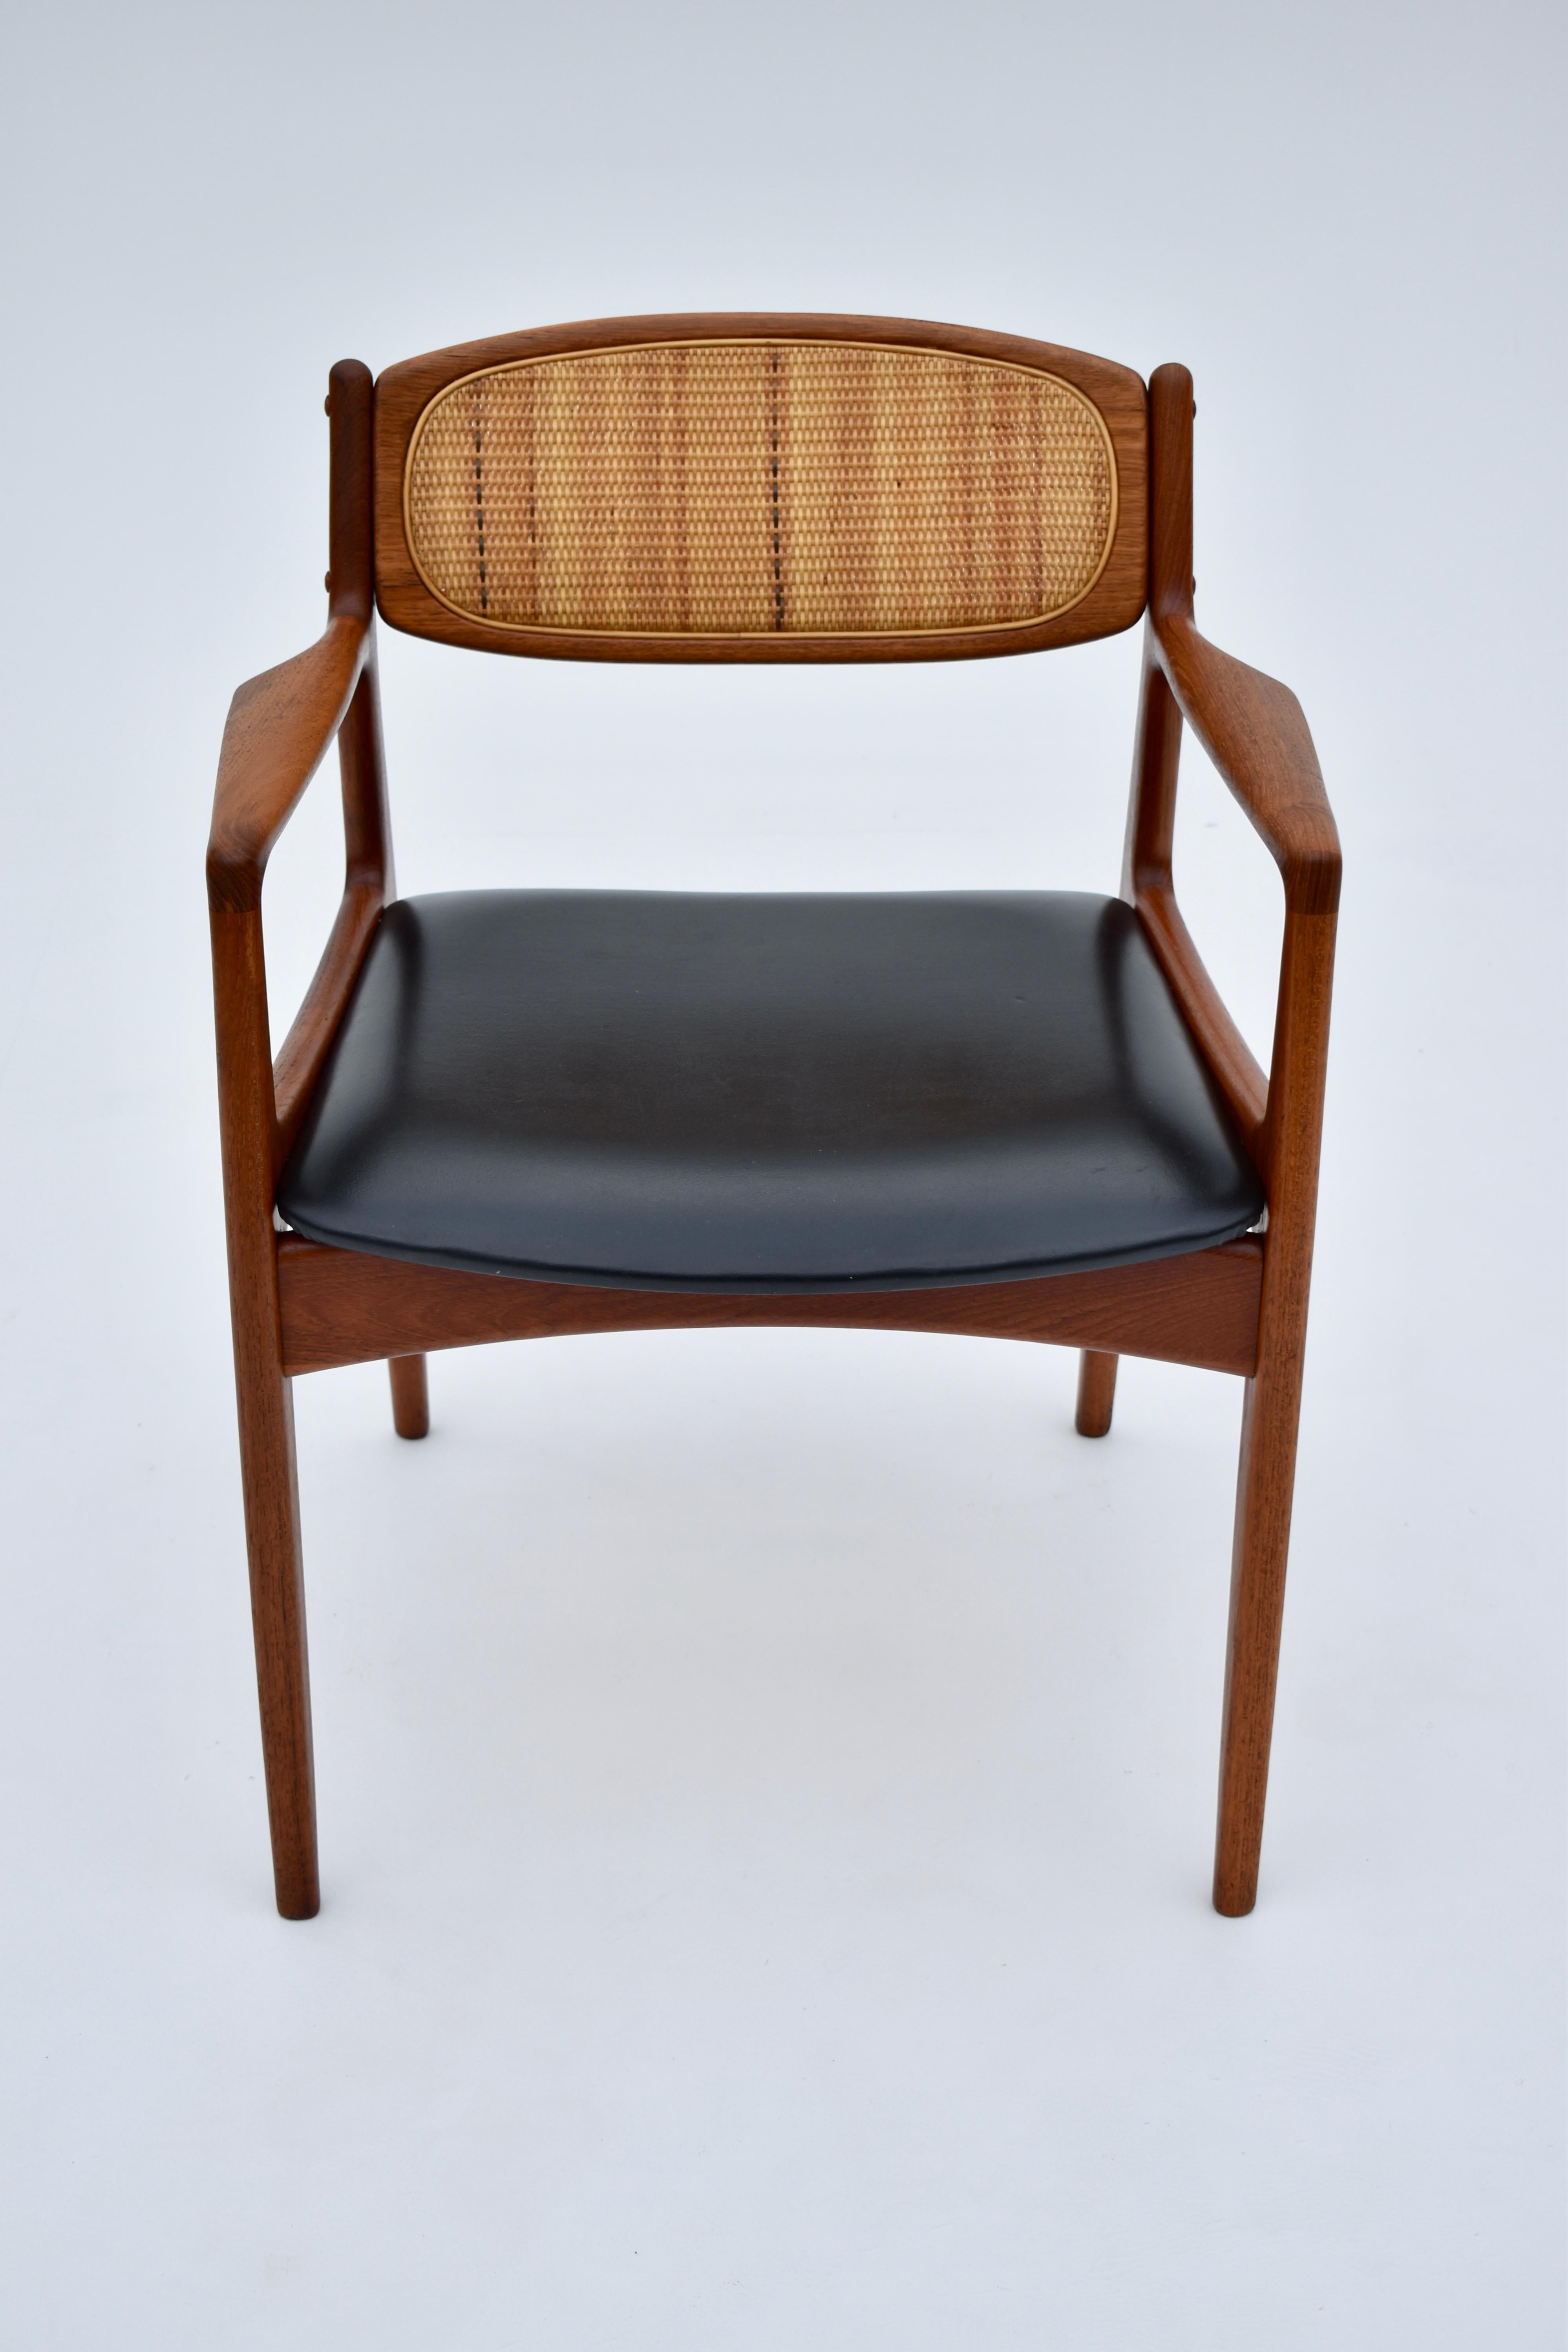 A particularly hard design to find this is a very handsome desk chair or side chair designed by Ib Kofod Larsen for Christian linneberg.

A solid teak frame with original rattan backrest and original black vinyl seat. A very pleasing mix of